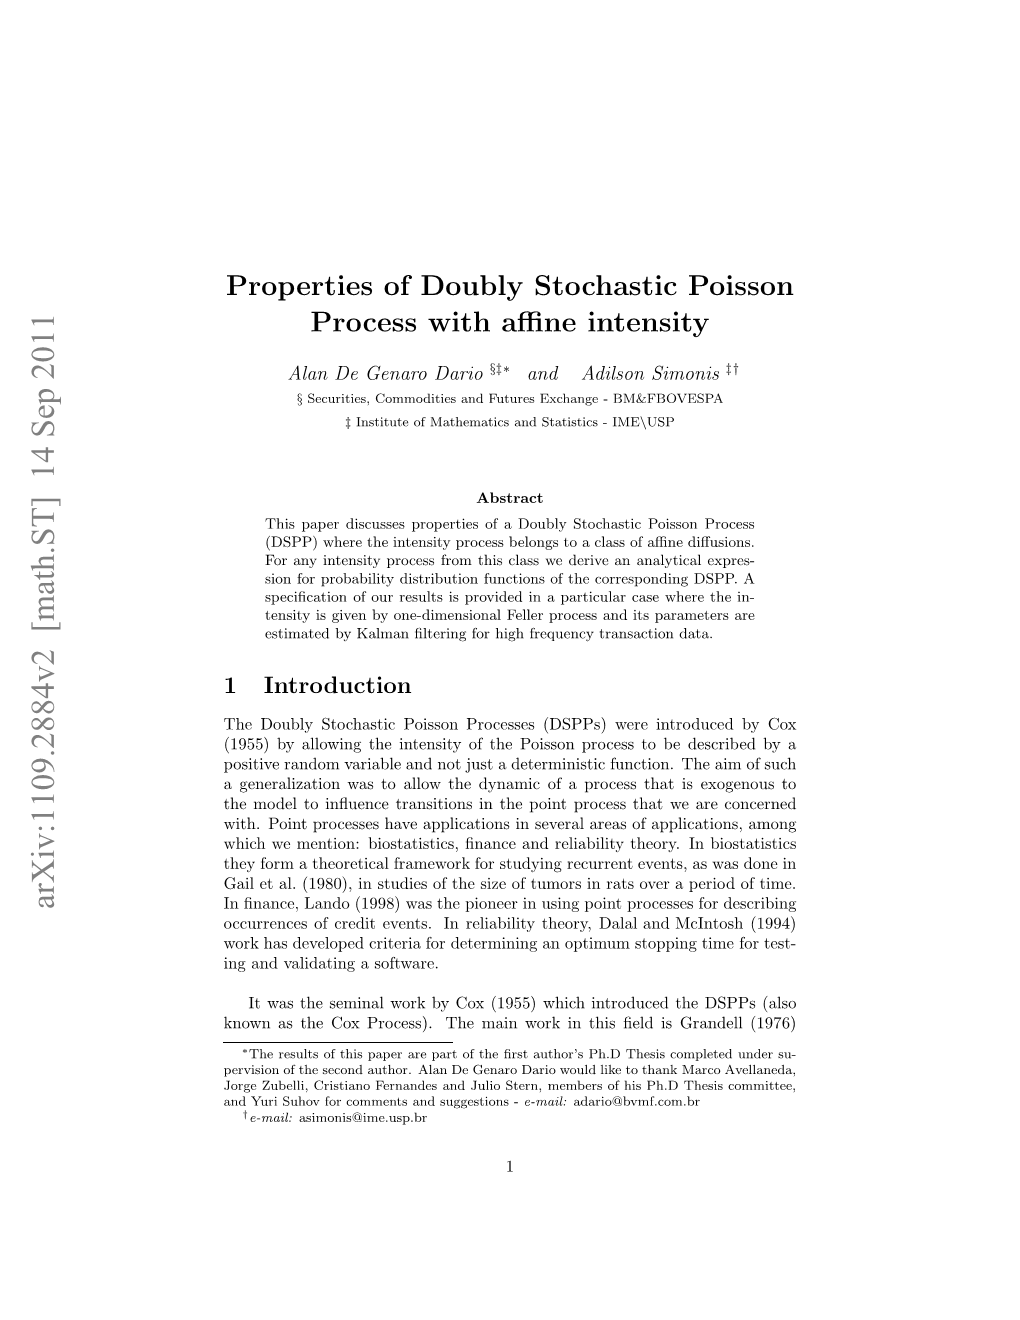 Properties of Doubly Stochastic Poisson Process with Affine Intensity